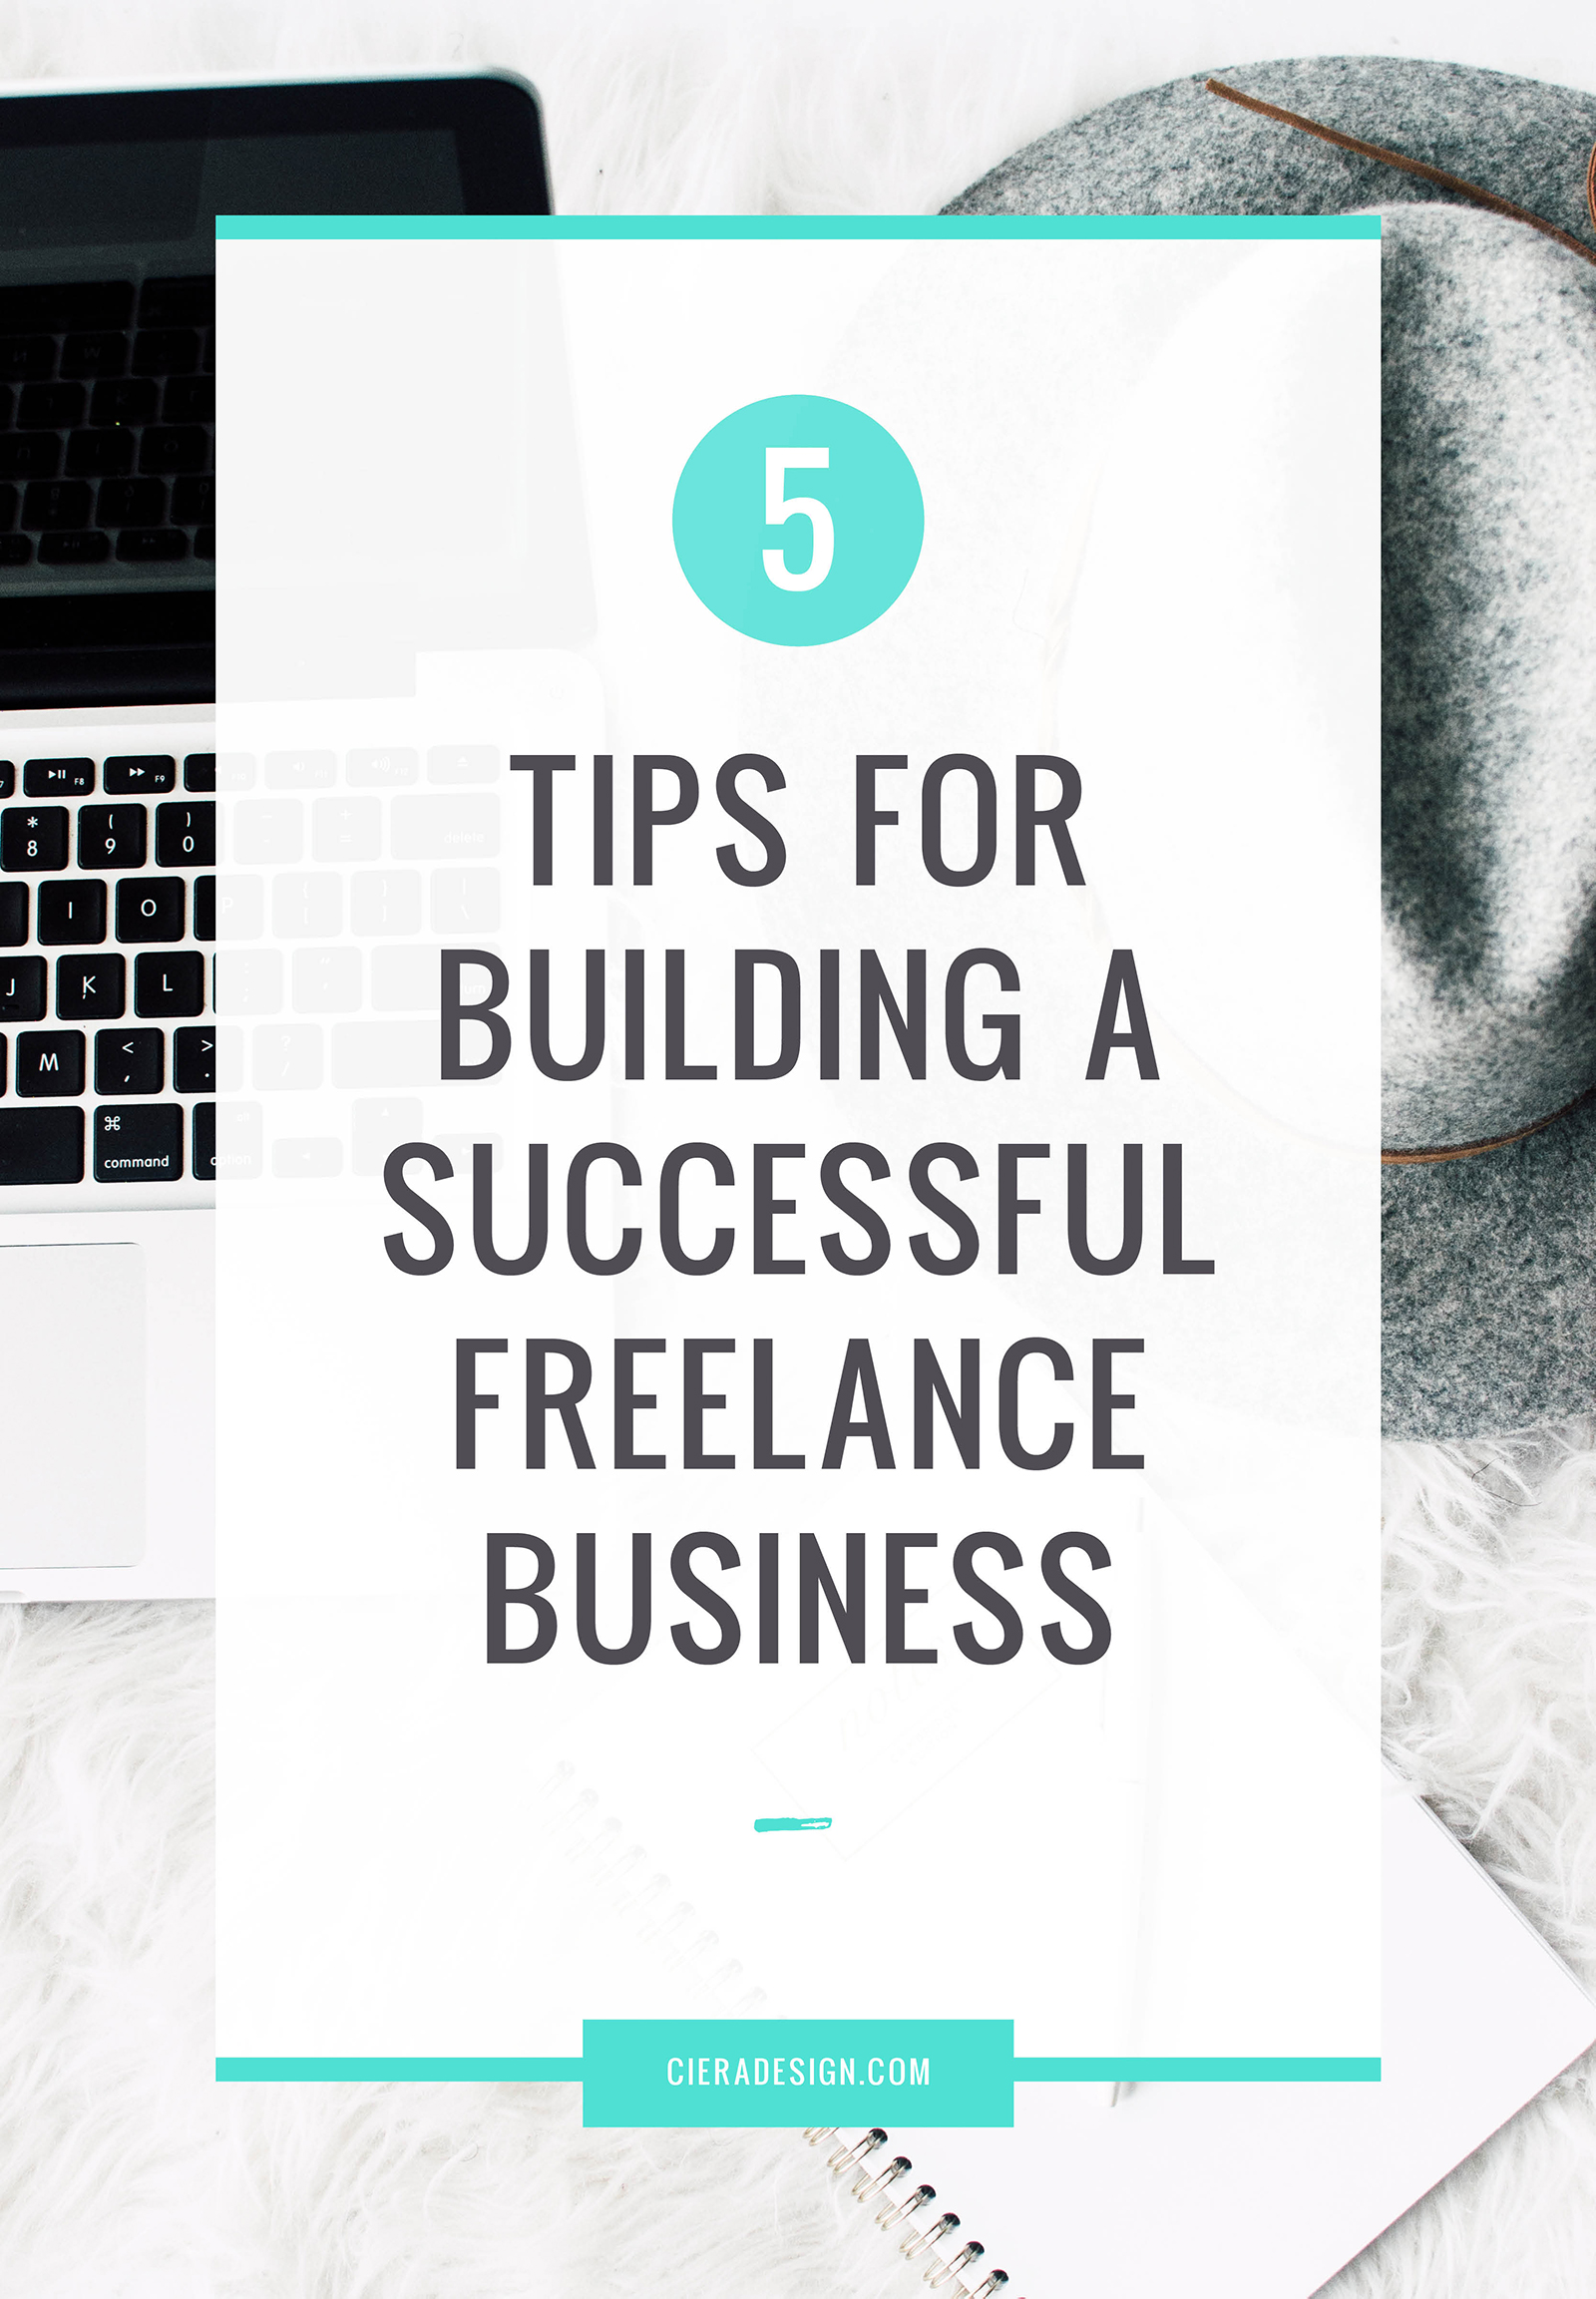 5 Tips for Building a Successful Freelance Business - Looking back on 5 years of freelancing.